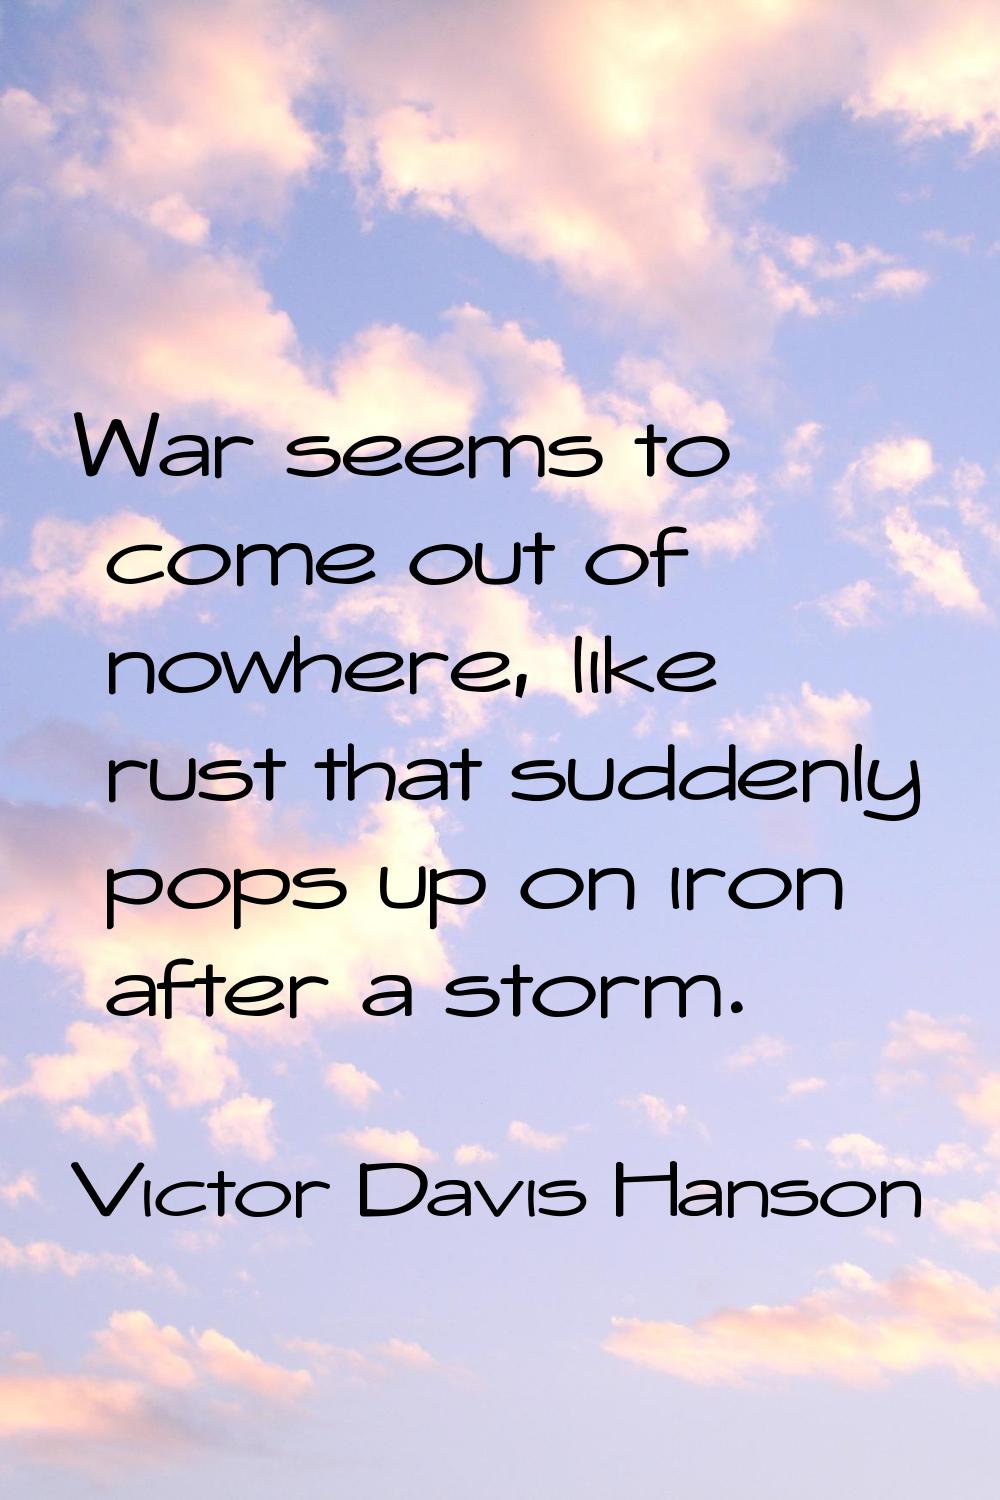 War seems to come out of nowhere, like rust that suddenly pops up on iron after a storm.